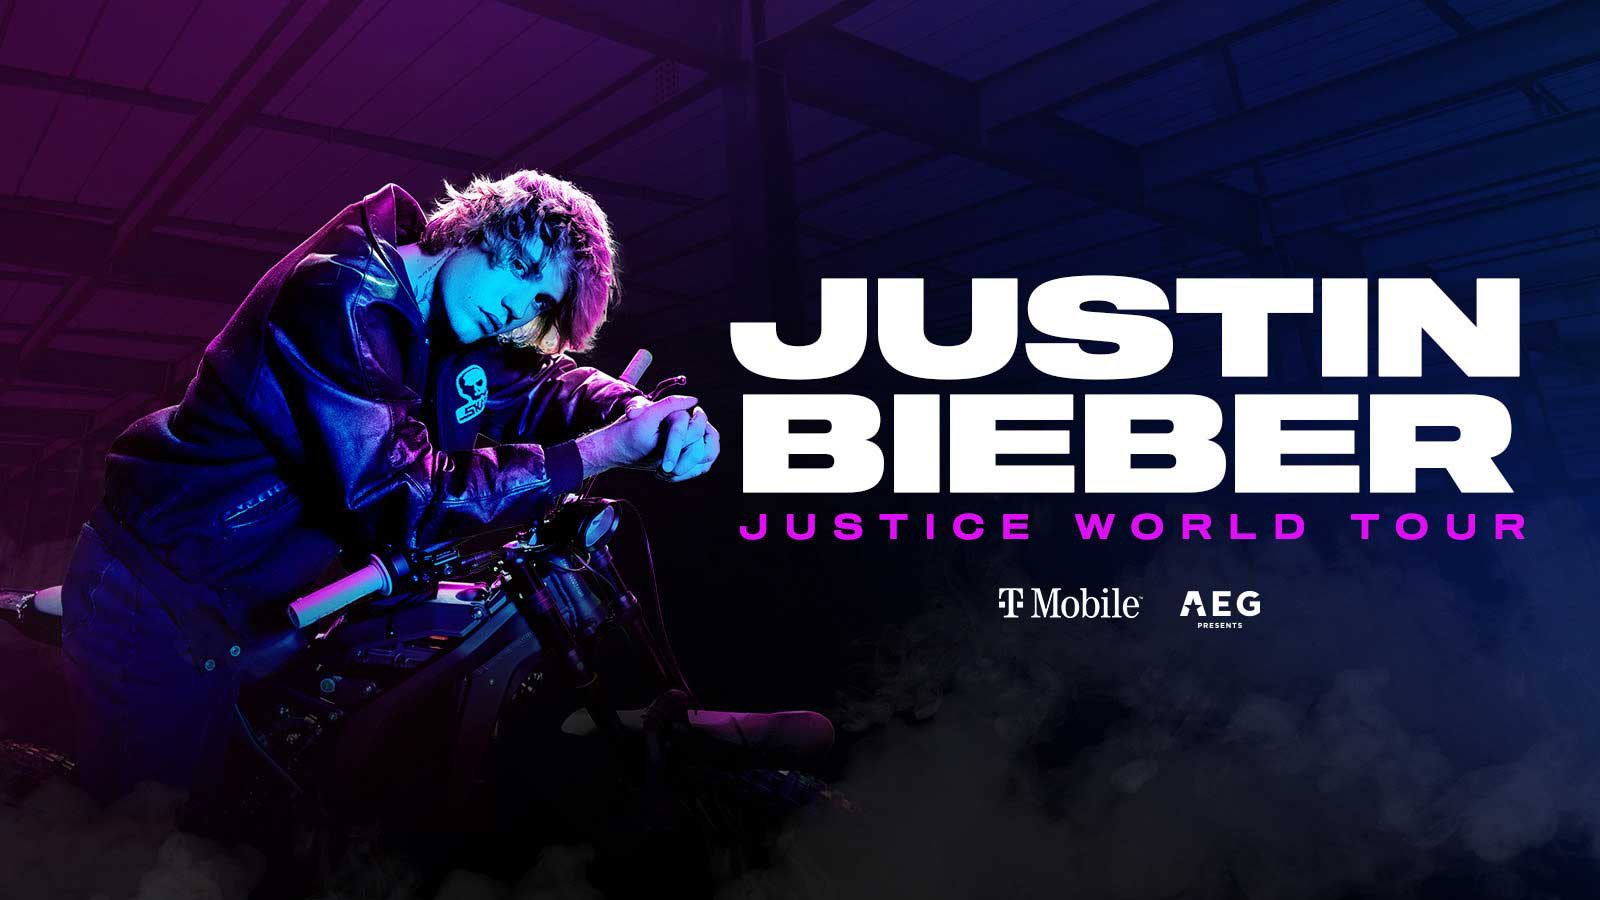 Justin Bieber's new tour offers incentives for fans to do good, support nonprofits